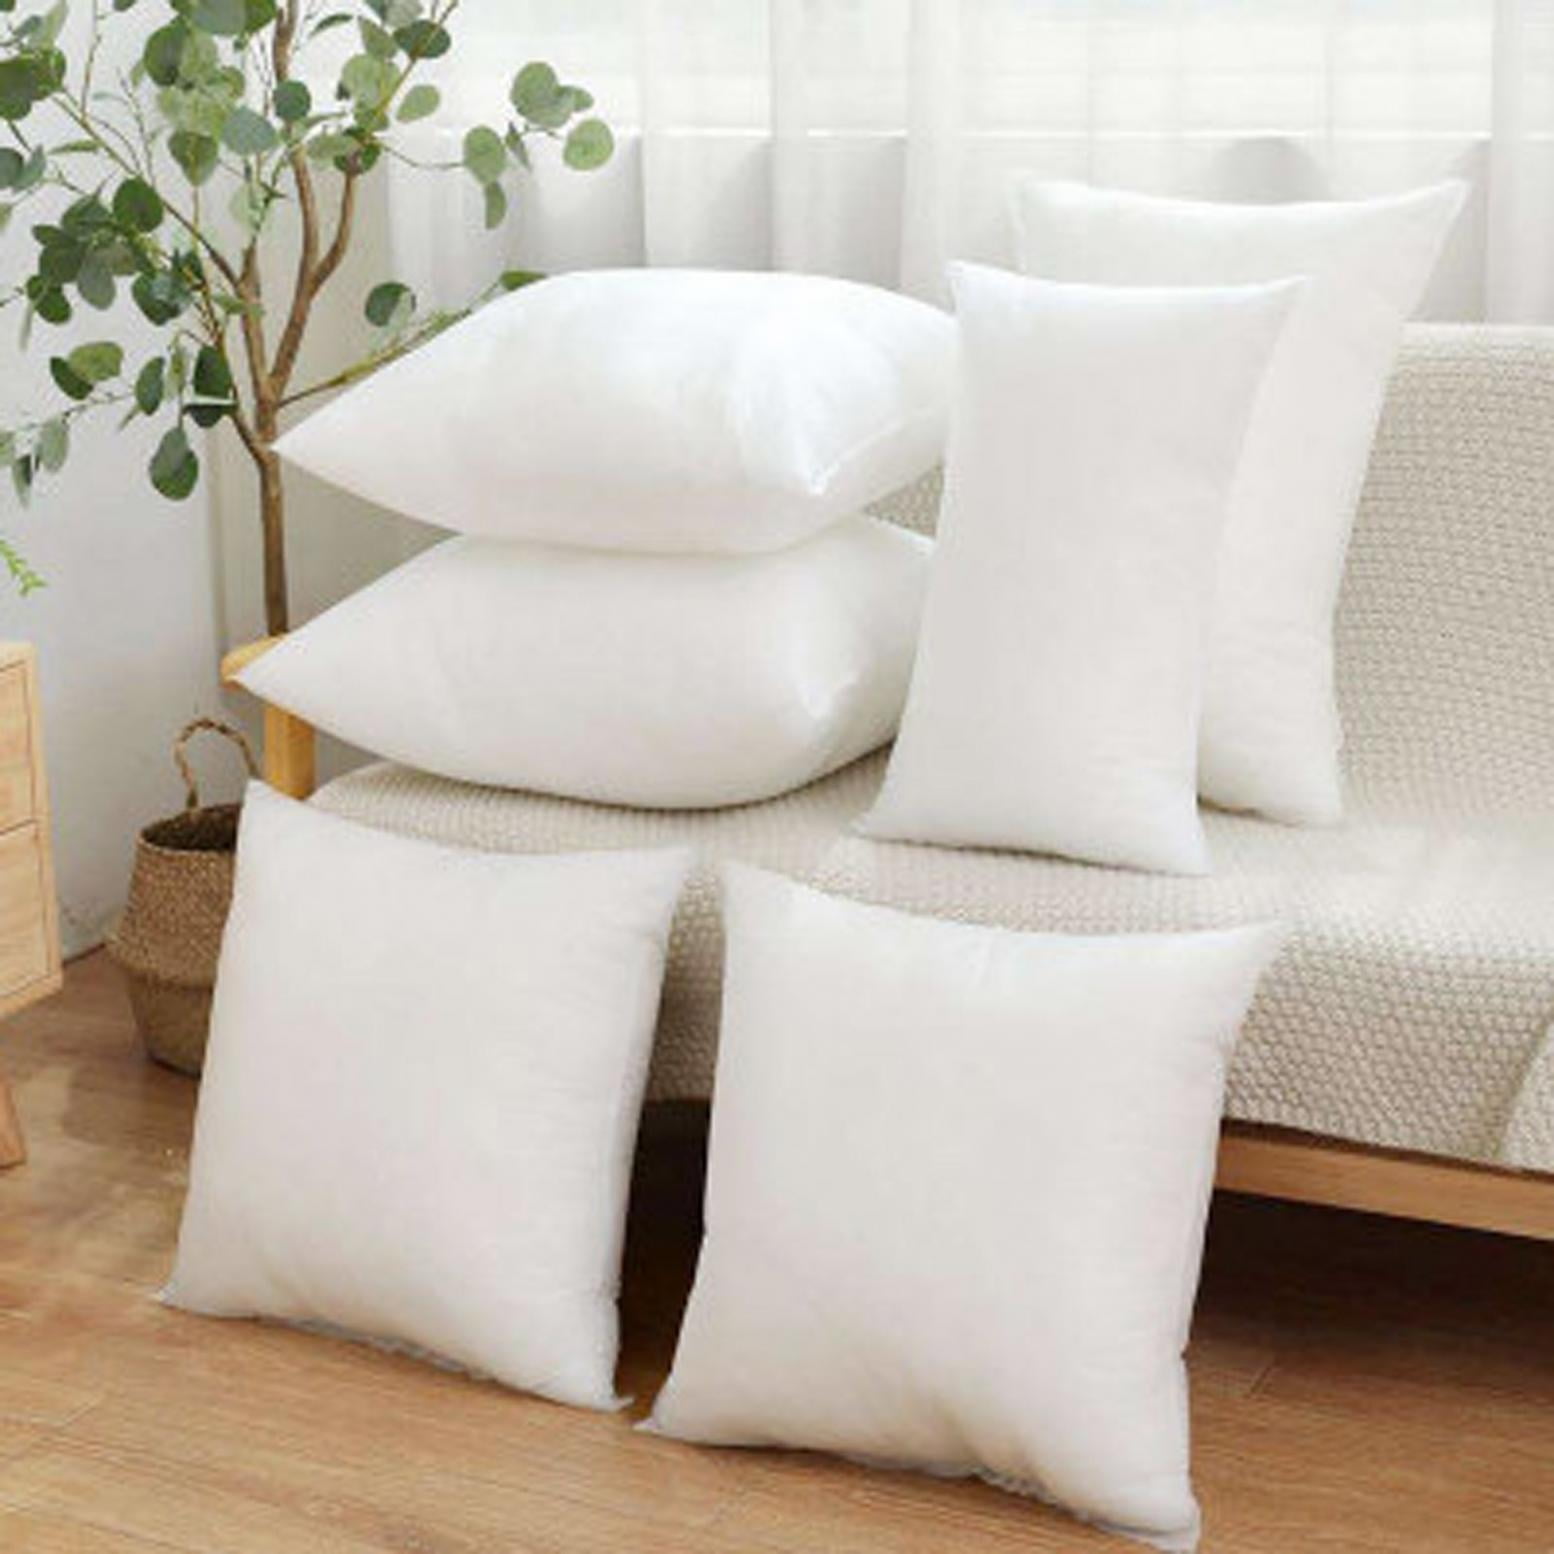 Leeden 18 x 18 Pillow Inserts (Set of 2) - Throw Pillow Inserts with 100% Cotton Cover - 18 inch Square Interior Sofa Pillow